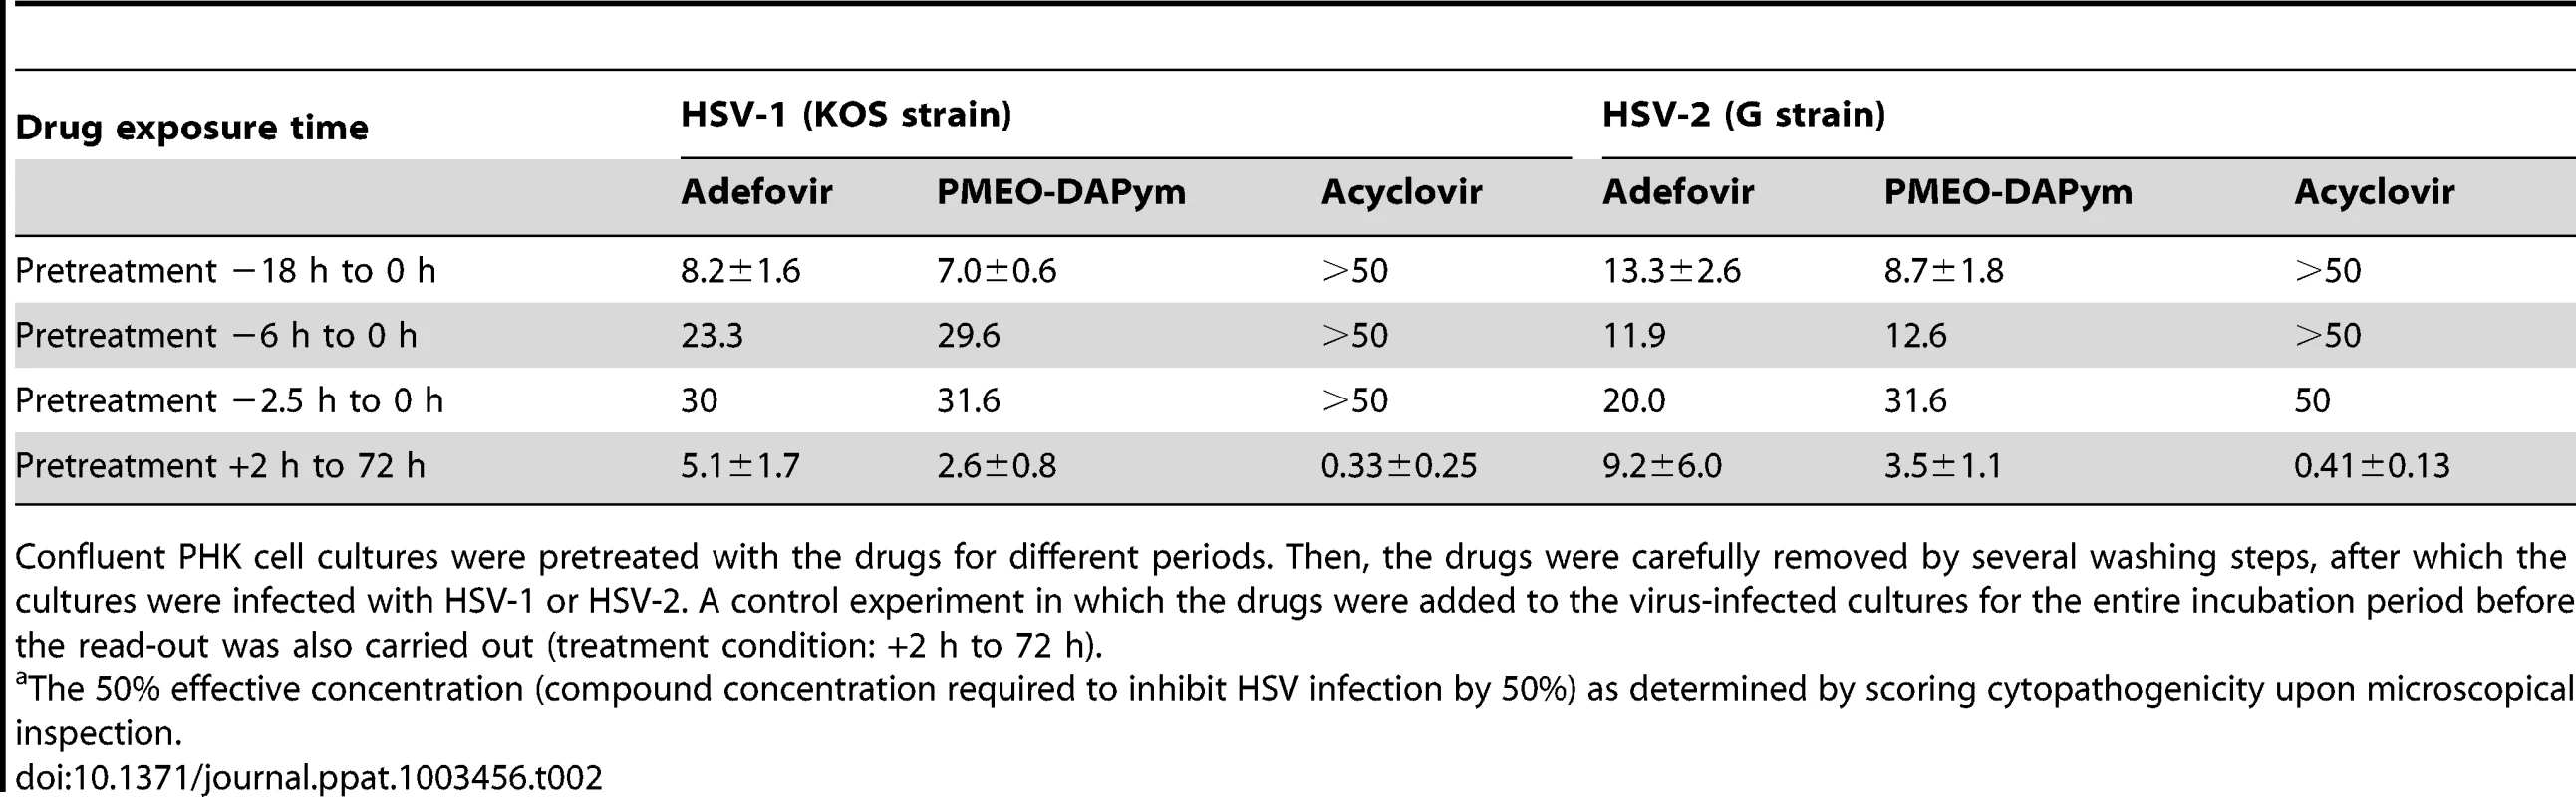 Effect of pre-treatment of PHK (primary human keratinocyte) cell cultures with the drugs on herpesvirus infection.